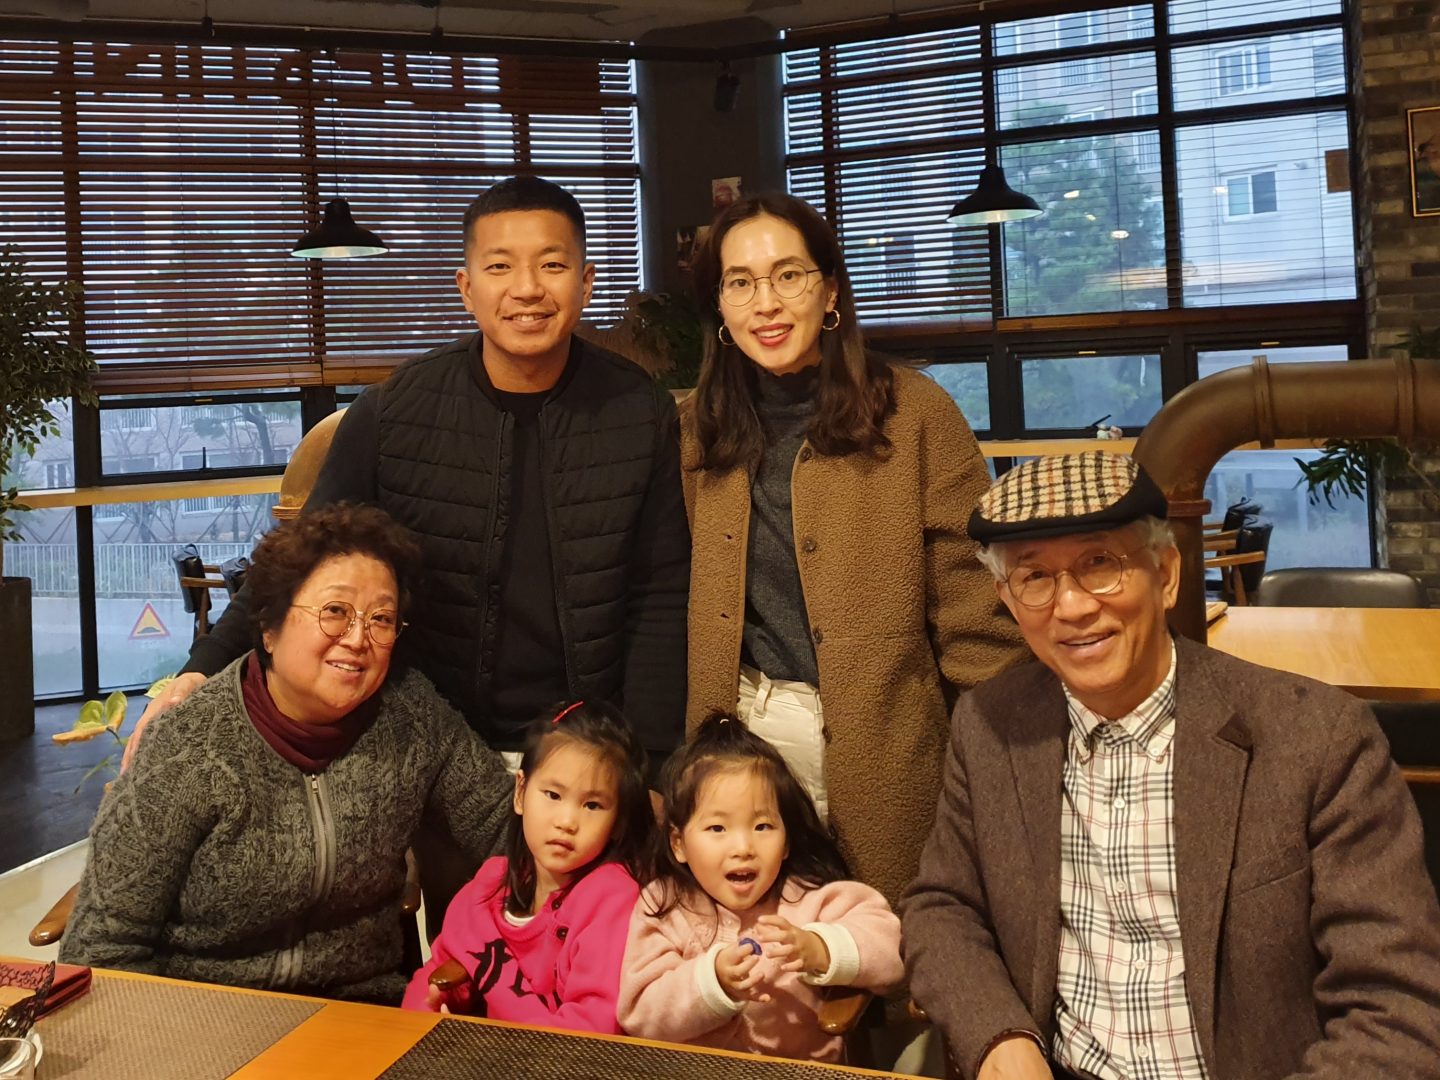 Nan and Han Jung with Hudson, his wife, Grace, and their two daughters.